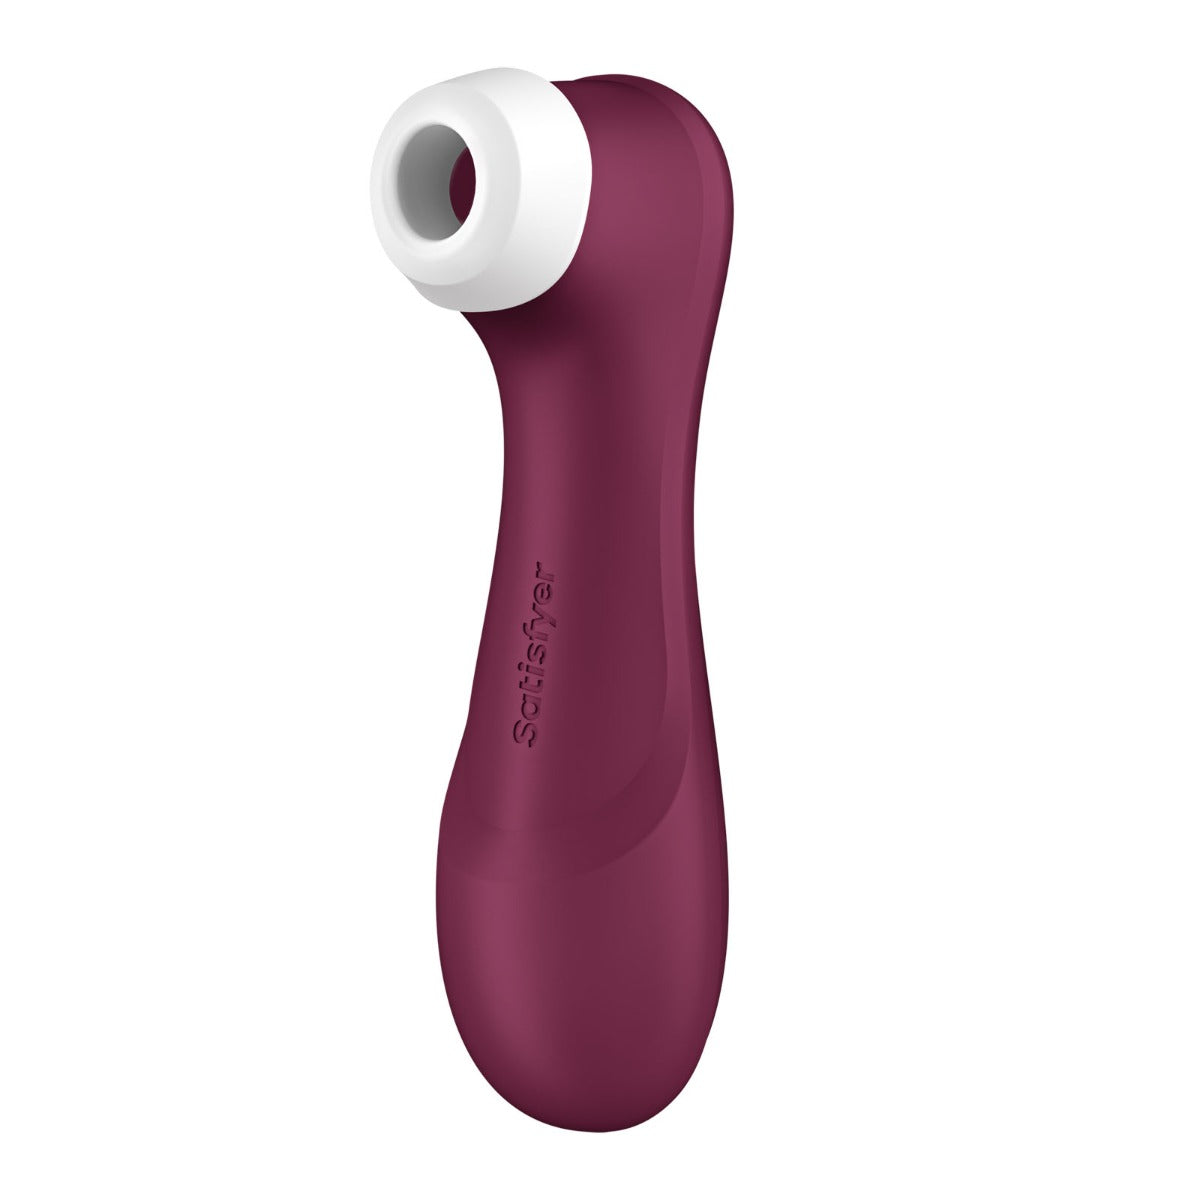 Satisfyer | Pro 2 Generation 3 with Liquid Air - Wine Red